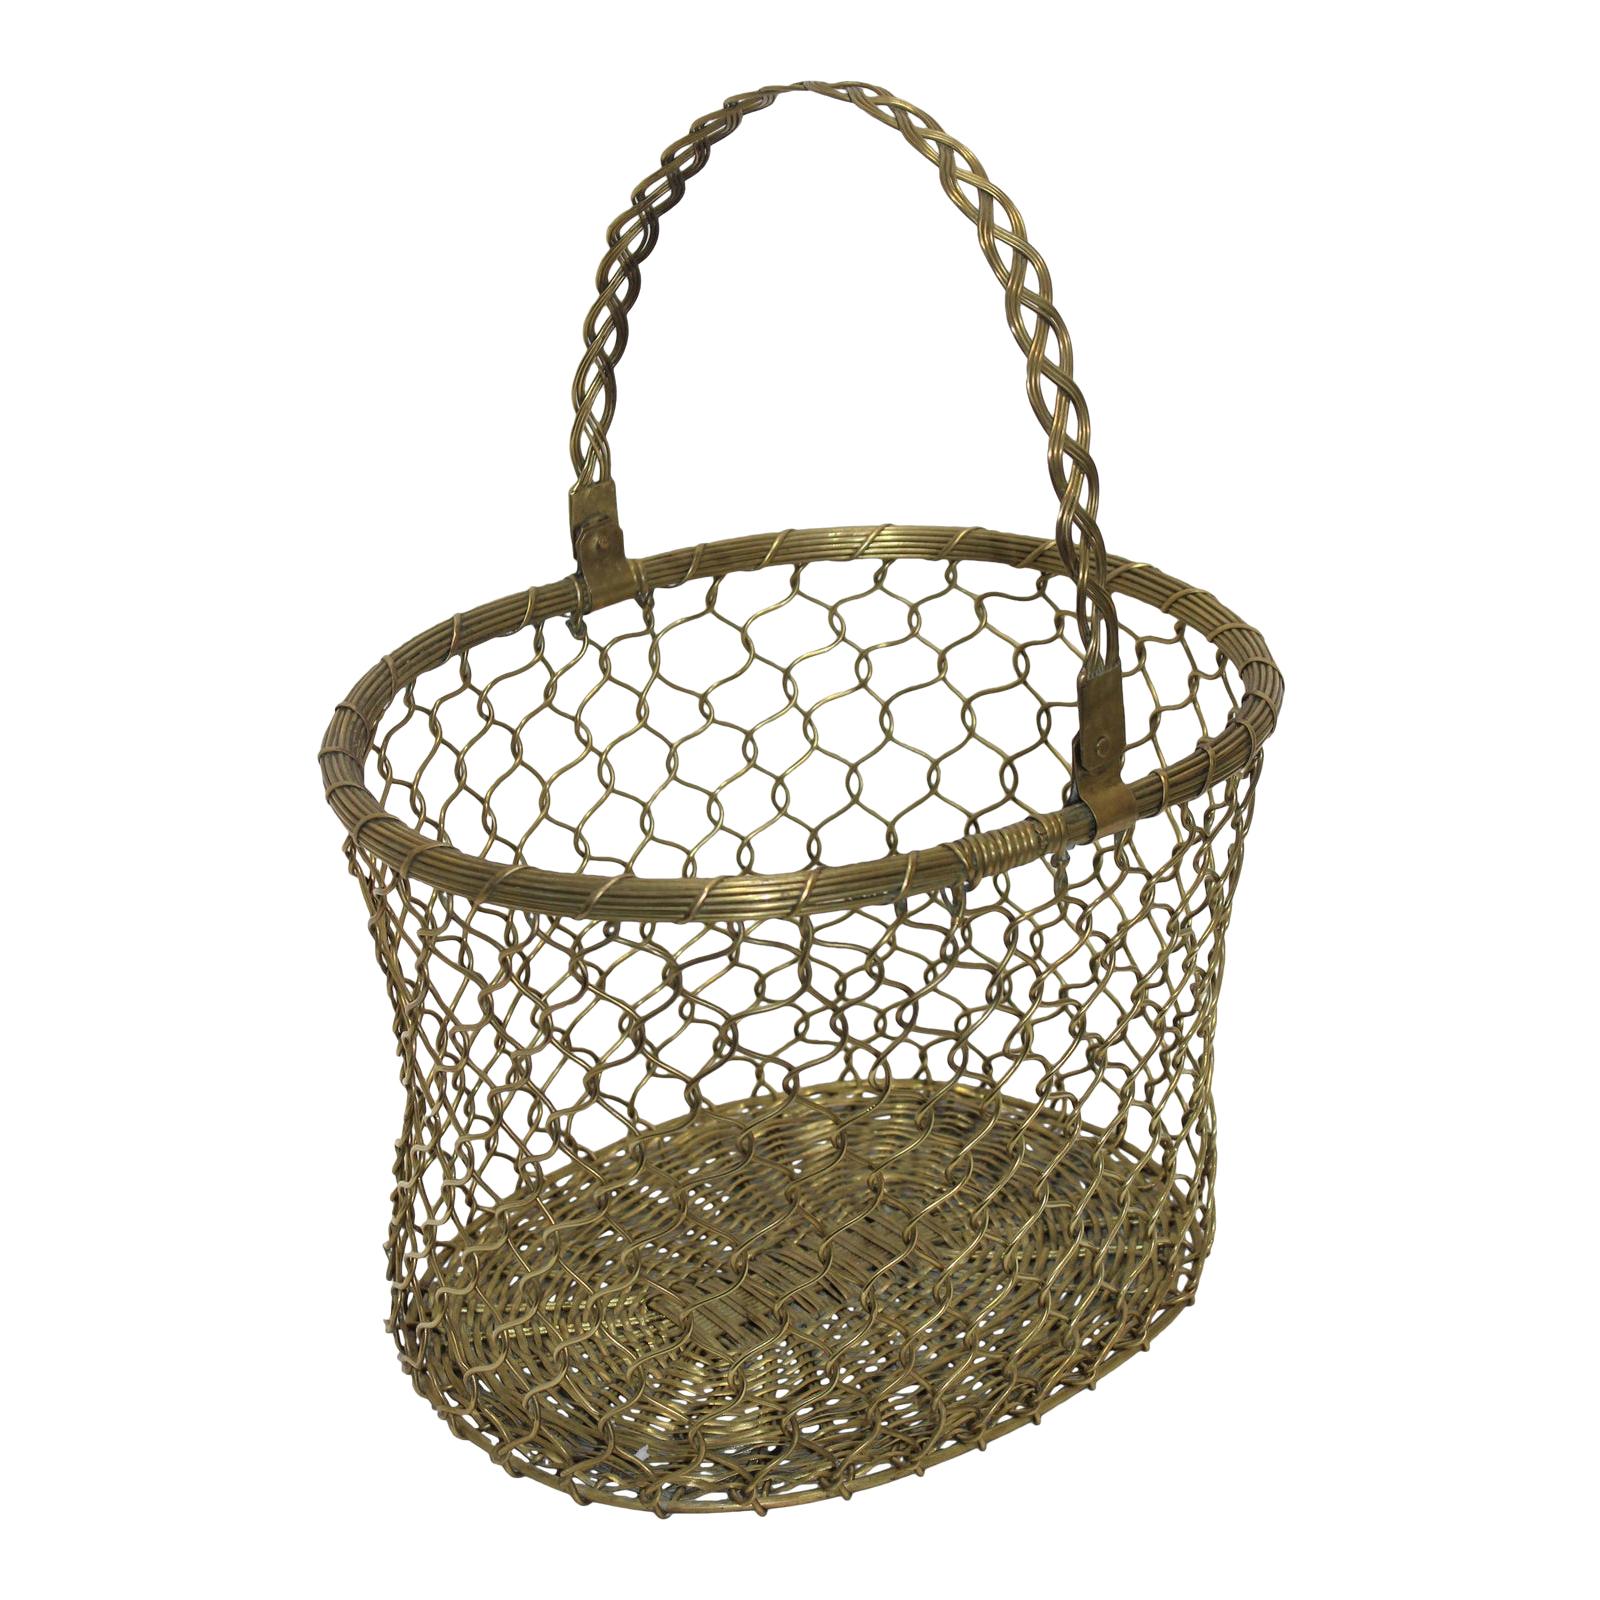 French Country Woven Brass Basket, Mid-20th Century For Sale